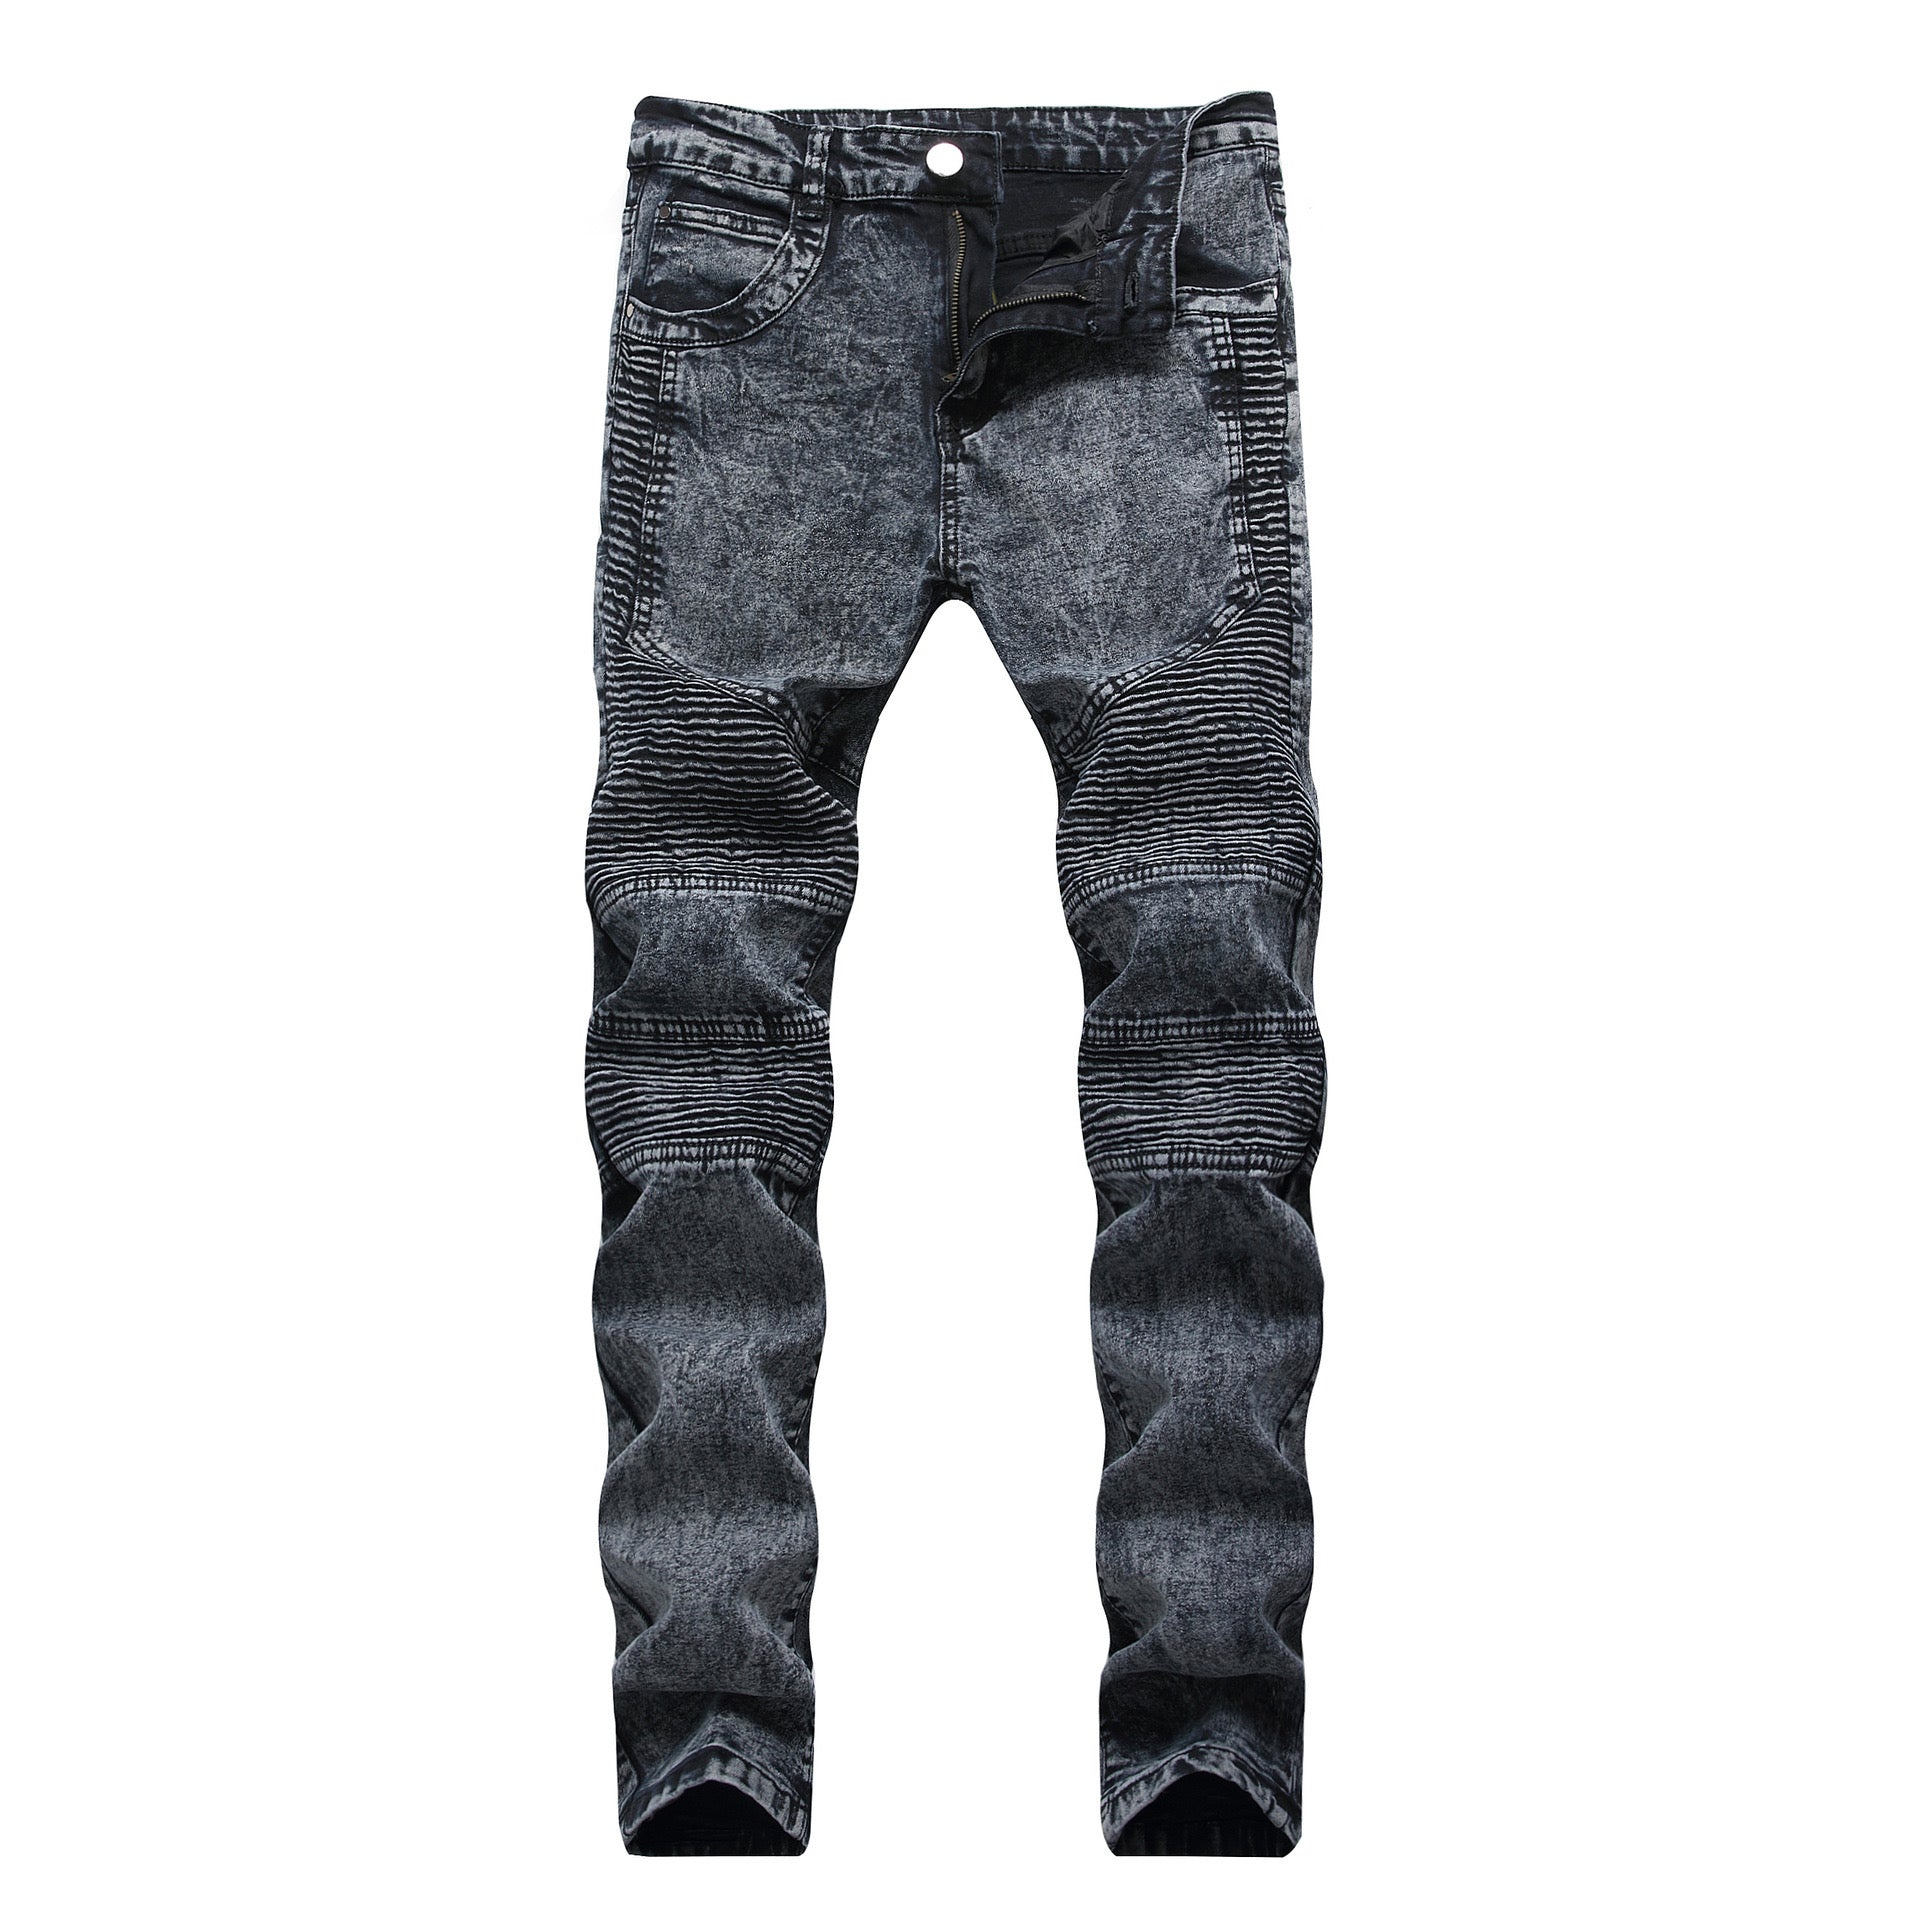 Gru - Grey Jeans for Men - Sarman Fashion - Wholesale Clothing Fashion Brand for Men from Canada